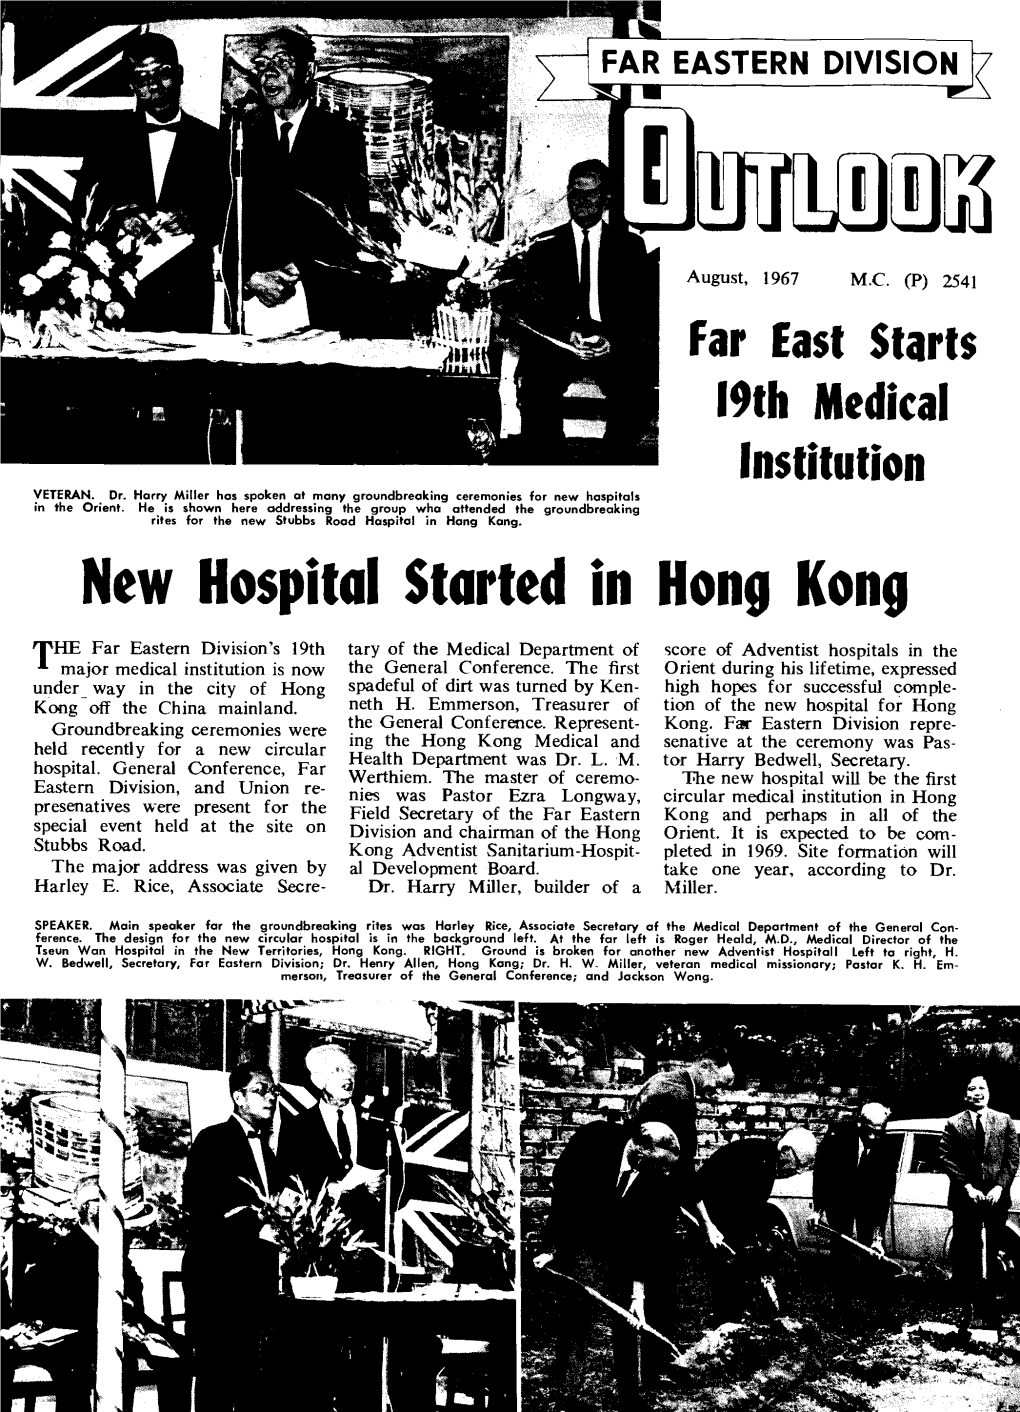 New Hospital Started in Hong Kong